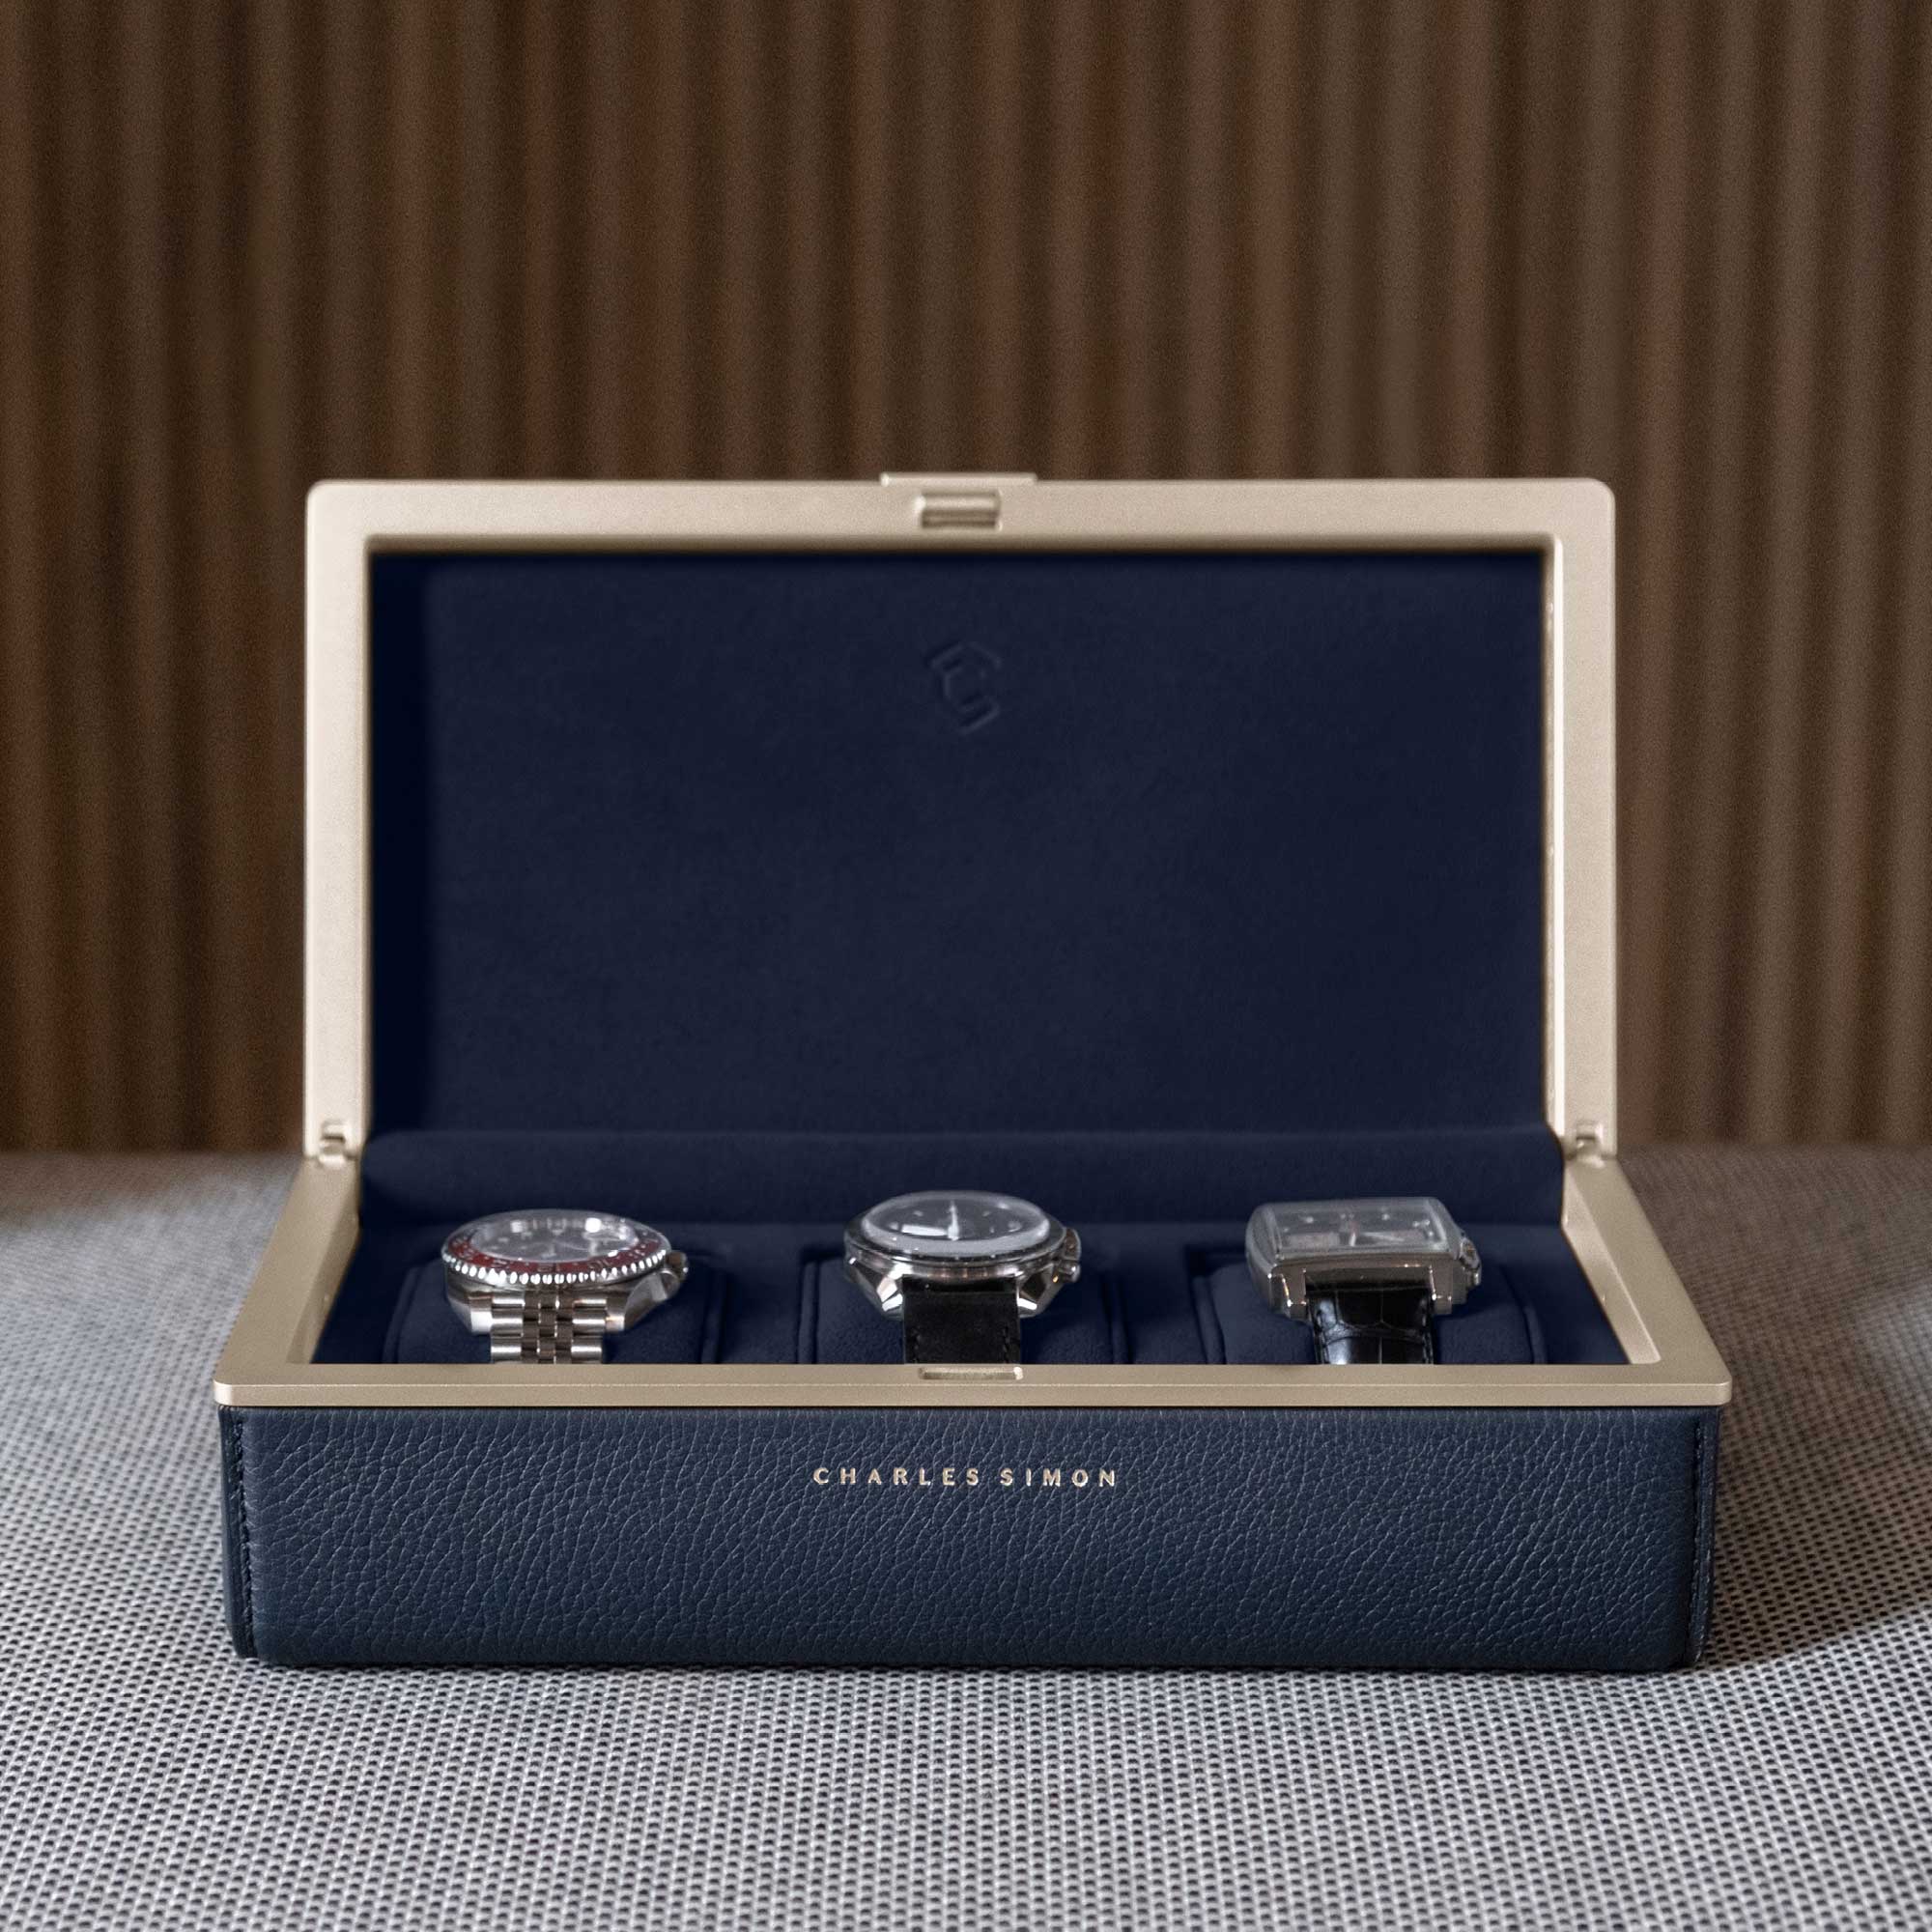 3 luxury watches elegantly displayed in the Eaton 3 Watch case in gold casing, marine leather and deep blue interior.